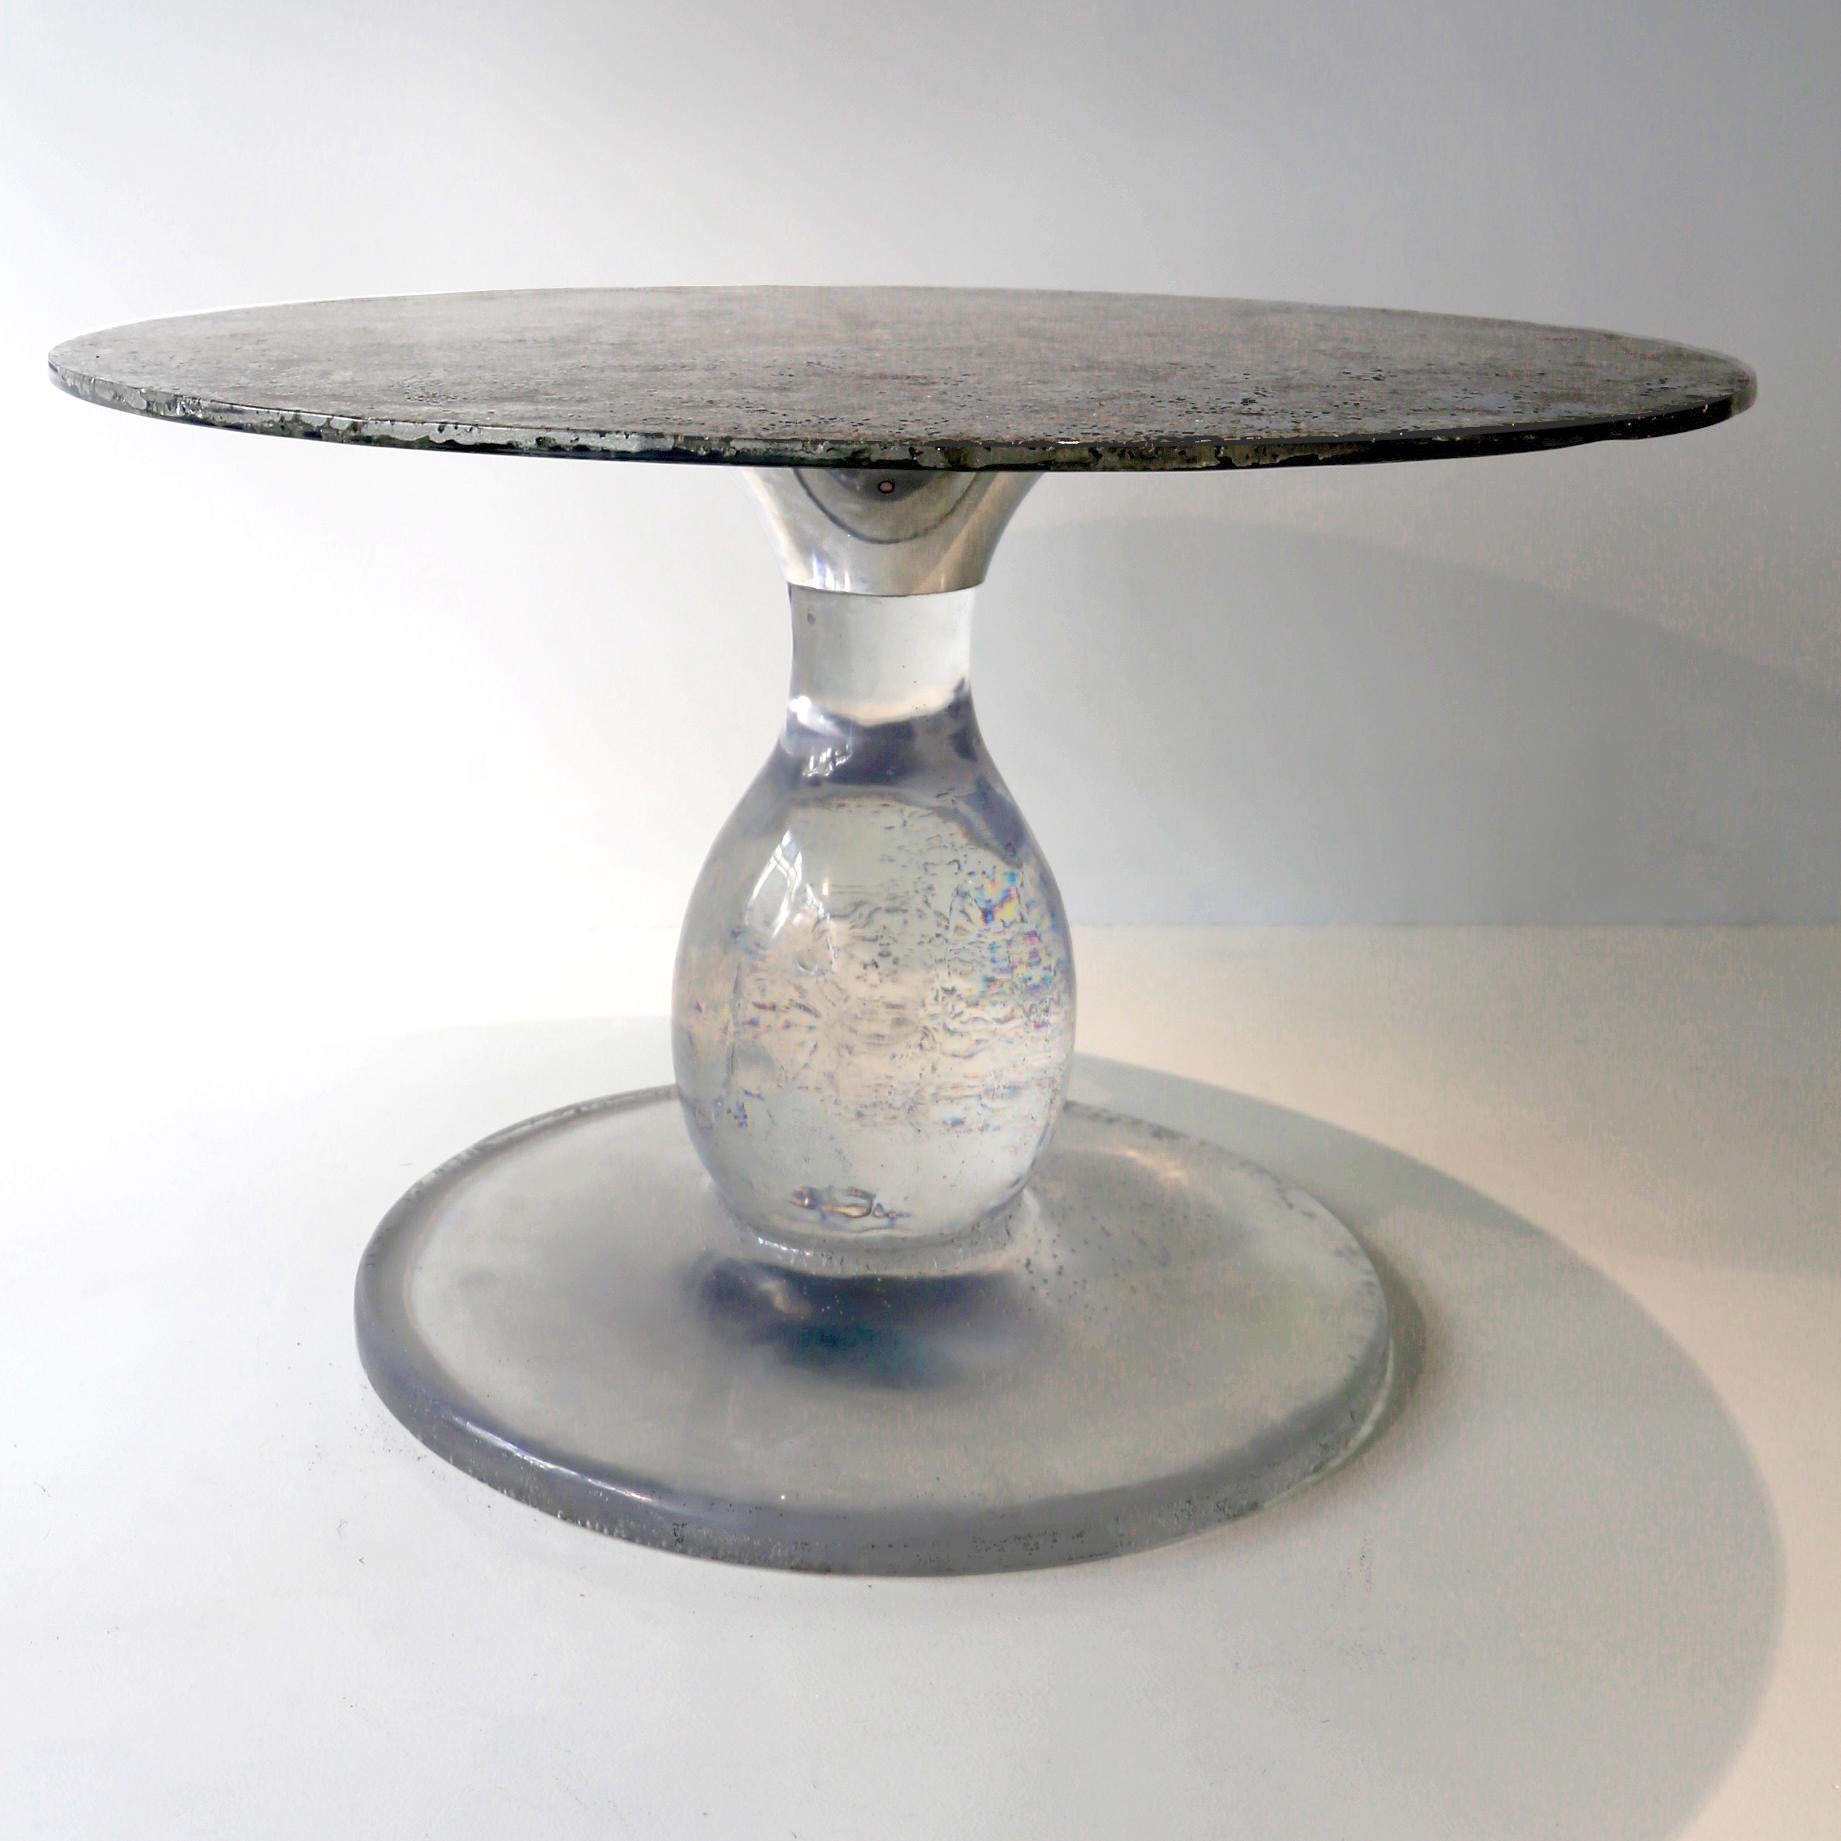 In stock, made in France: On a galactic crystal pedestal, made of the clearest resine, this contemporary pedestal table is a unique piece, created by Xavier Lavergne and sold with its authenticity certificate. The top is made of melted pewter with